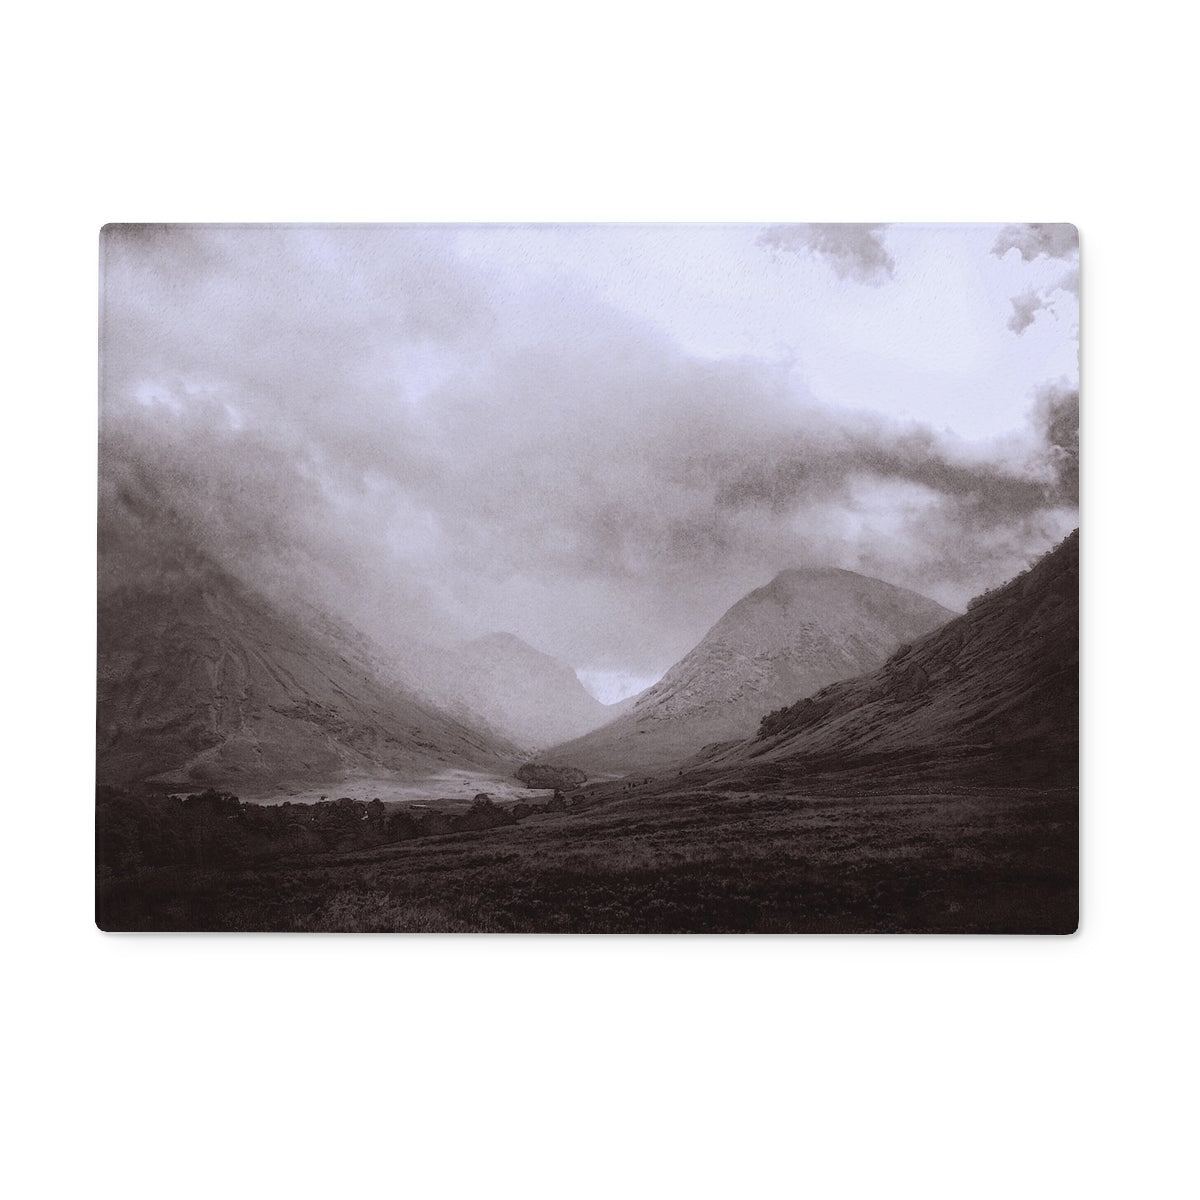 Glencoe Mist Art Gifts Glass Chopping Board-Glass Chopping Boards-Glencoe Art Gallery-15"x11" Rectangular-Paintings, Prints, Homeware, Art Gifts From Scotland By Scottish Artist Kevin Hunter